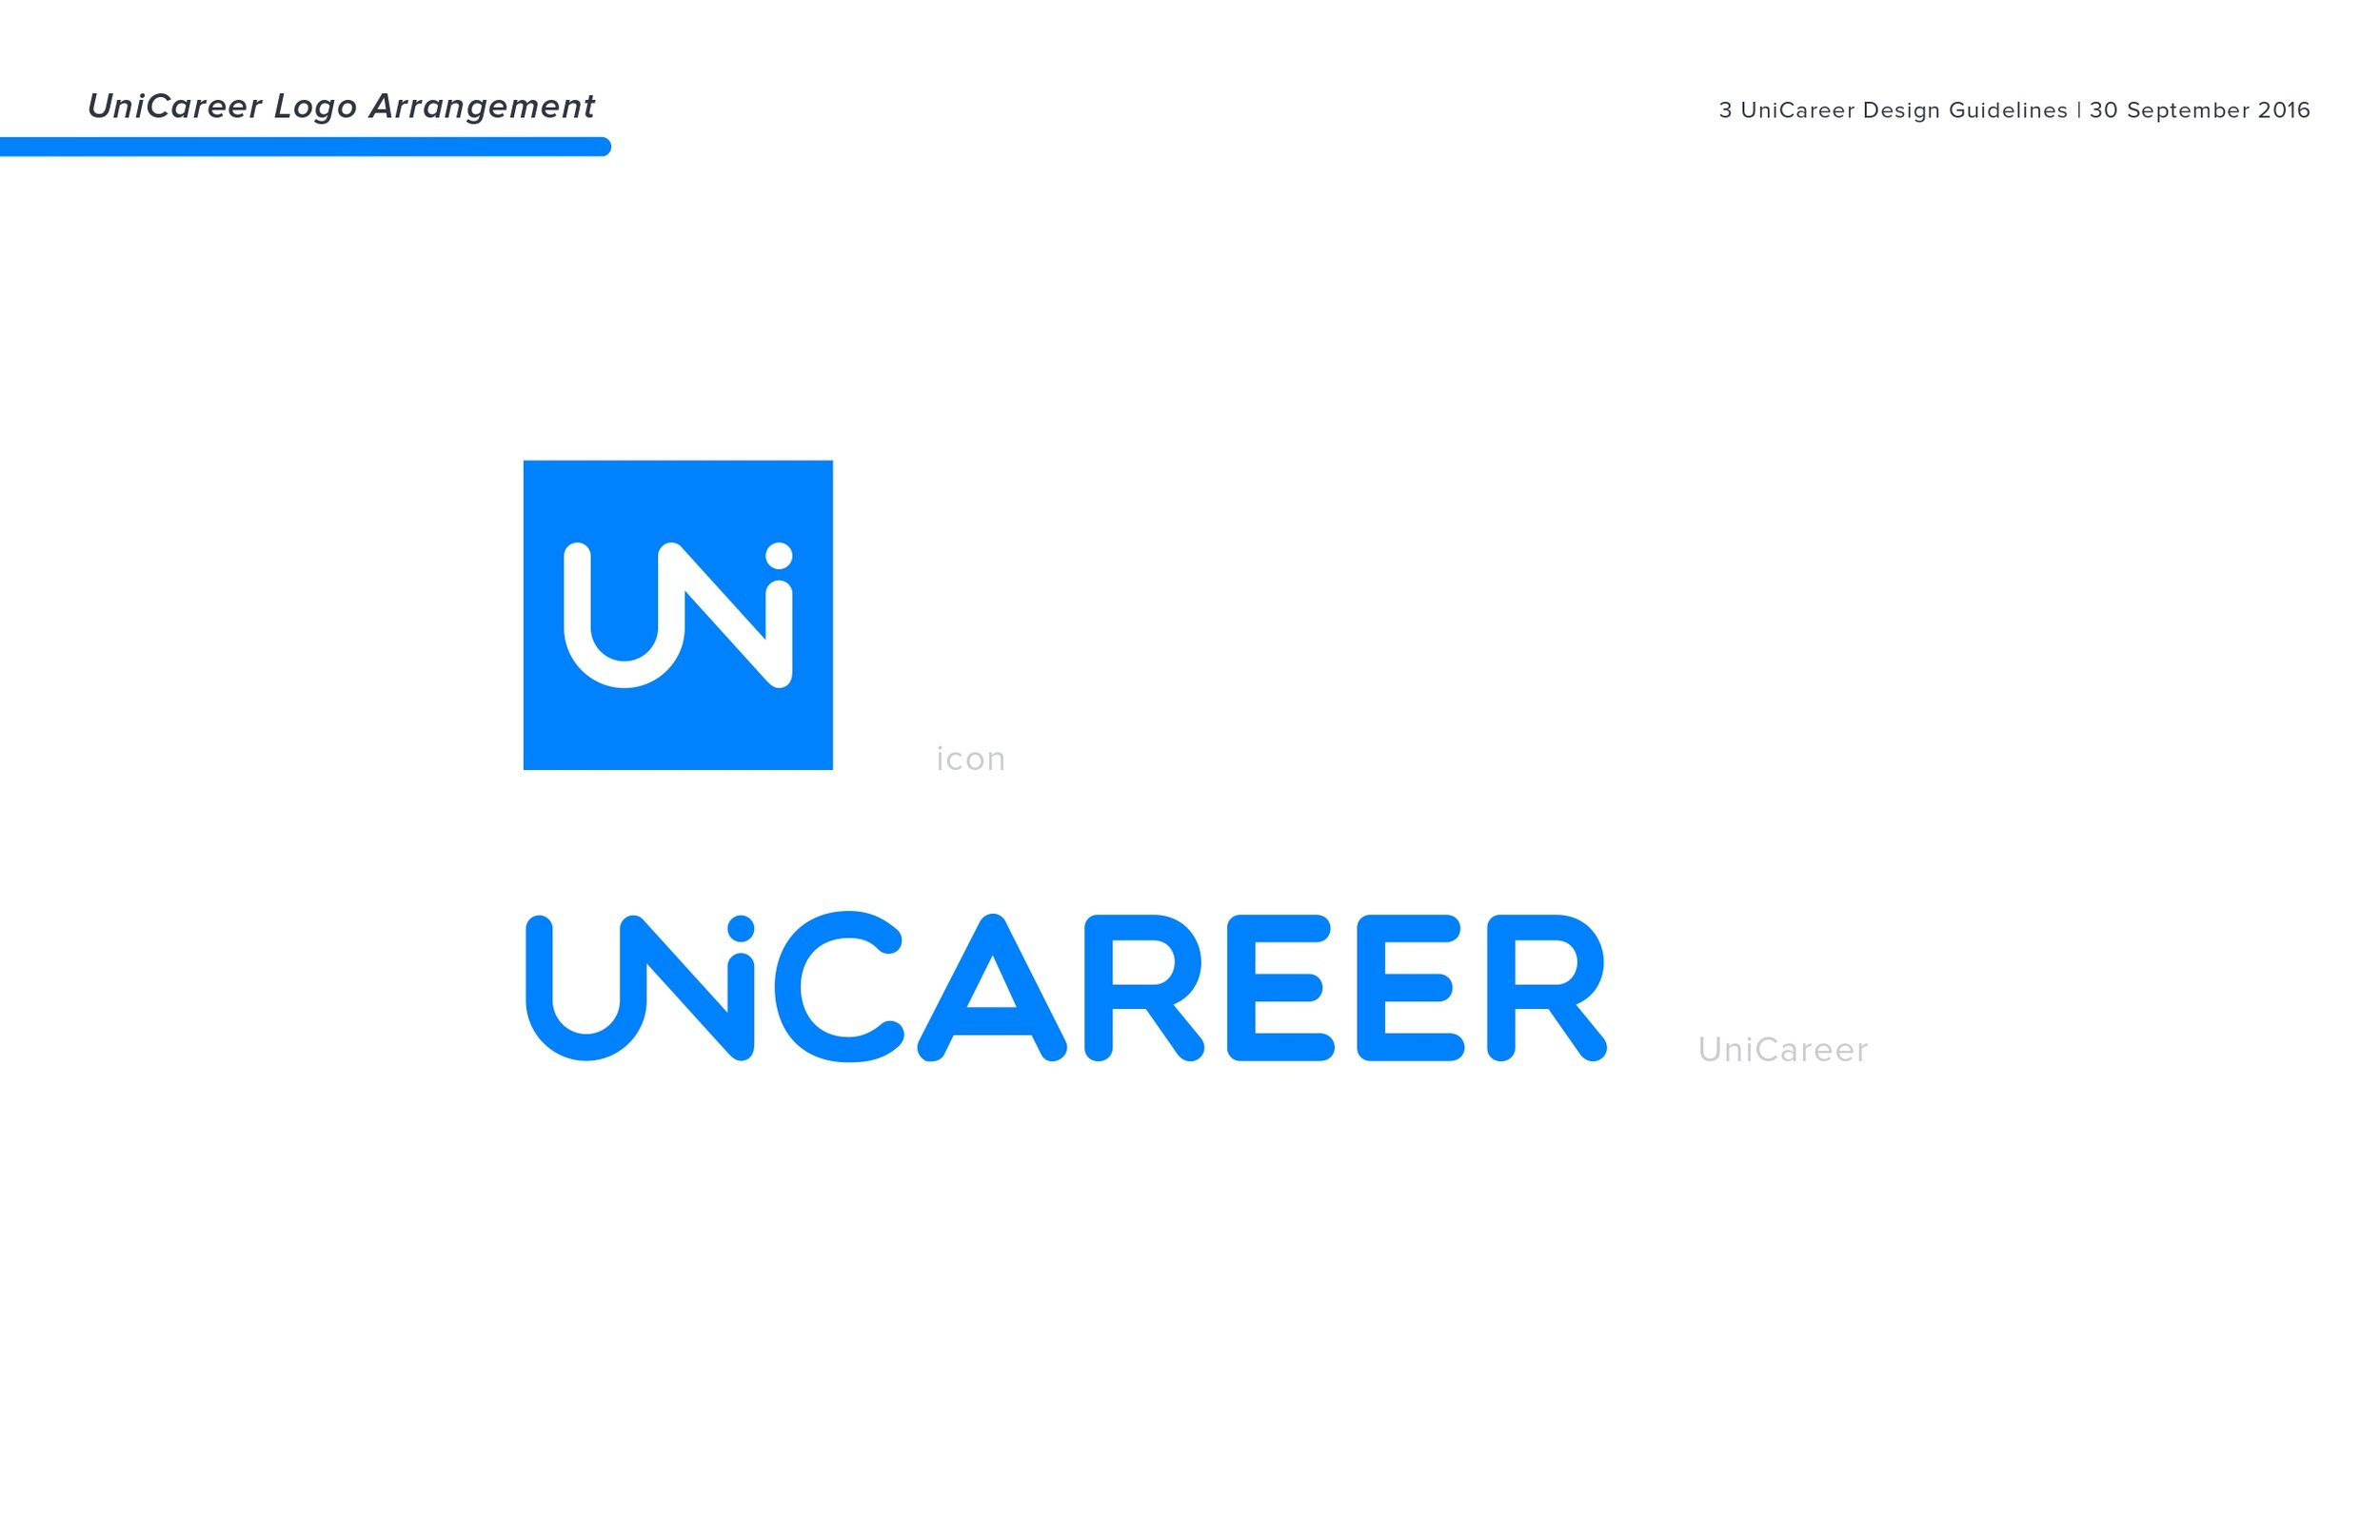 2016 UniCareer Design Guidelines_small_pages-to-jpg-0004.jpg